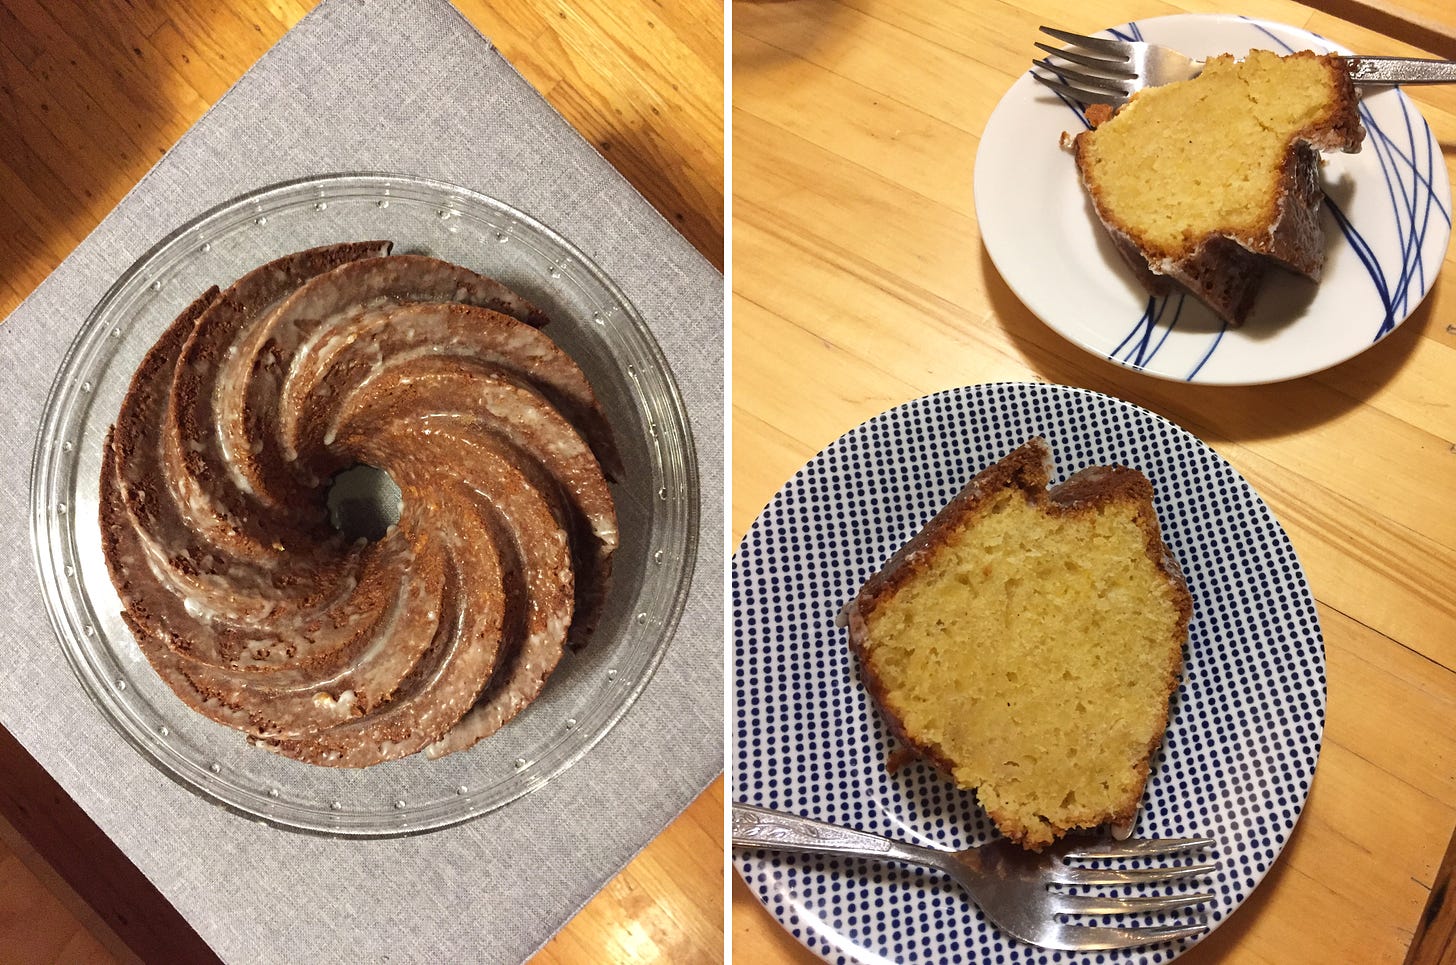 Left image: a spiral bundt cake, browned with a thin glaze, sits on a cake plate on top of a square grey ottoman. Left image: two slices of the cake sit on blue and white plates with forks resting at the edge. The cake has a browned exterior and a yellow interior.